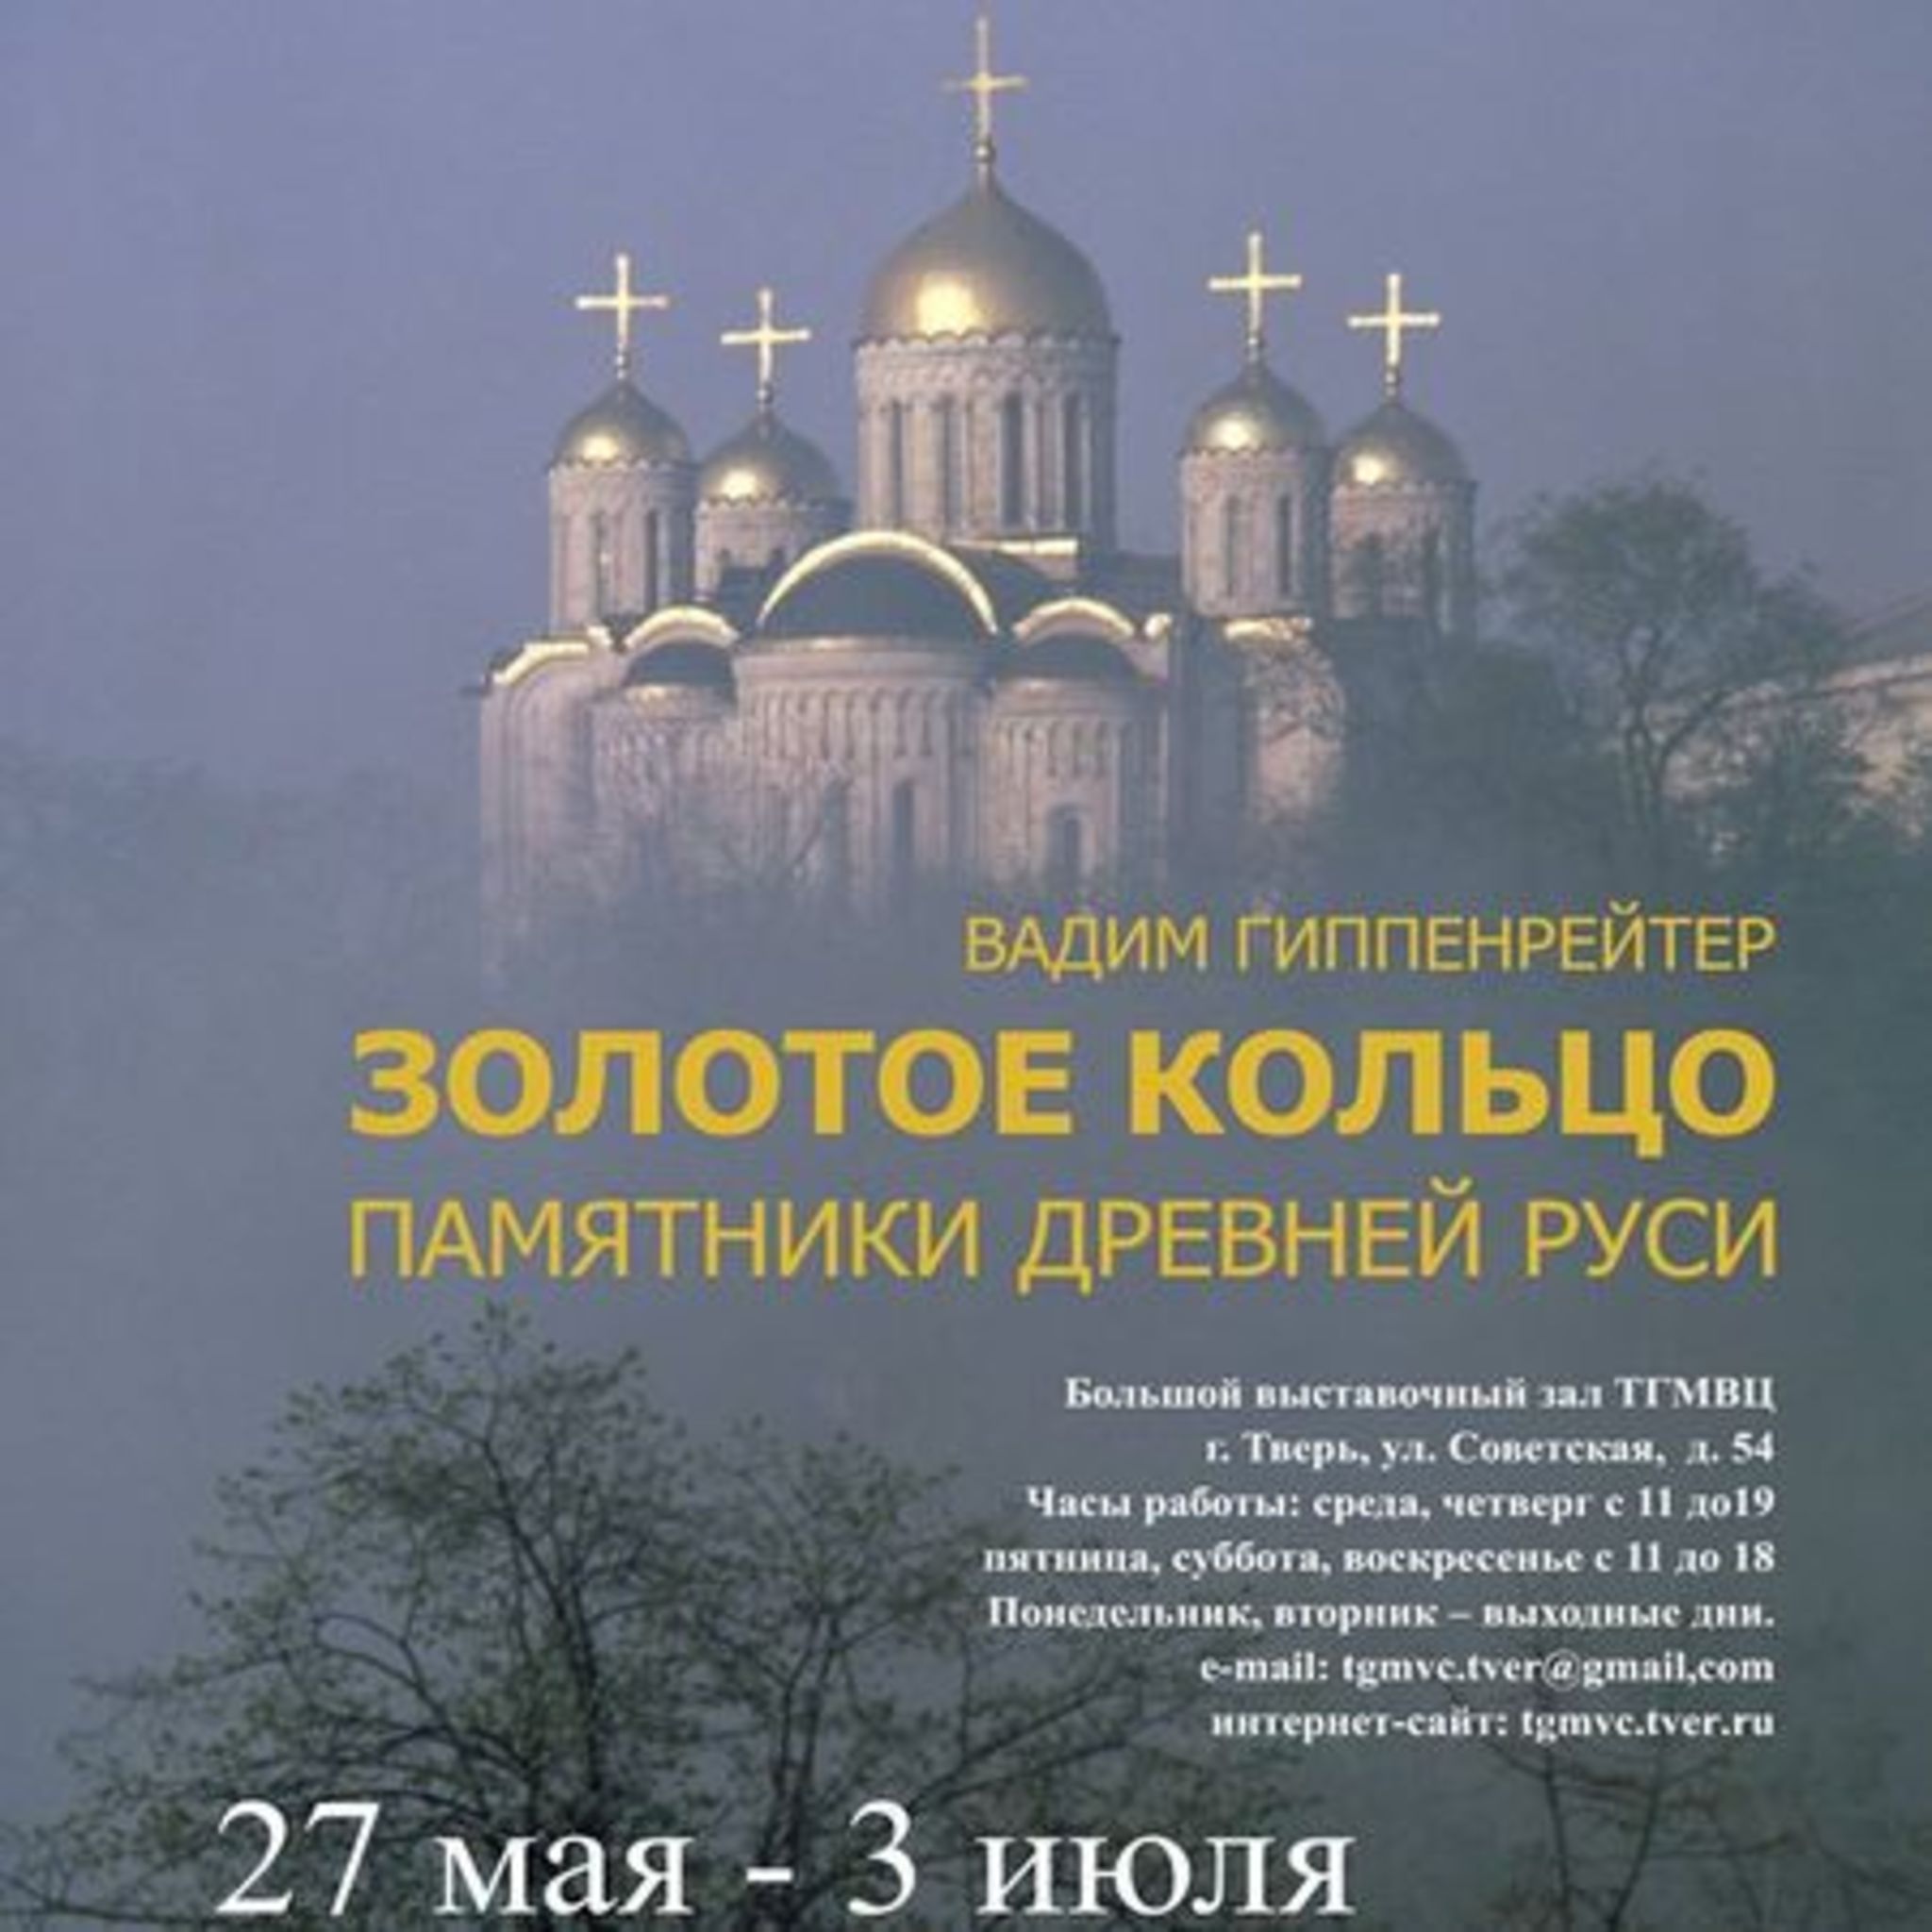 Exhibition Vadim Gippenreiter Golden Ring. Monuments of Ancient Rus